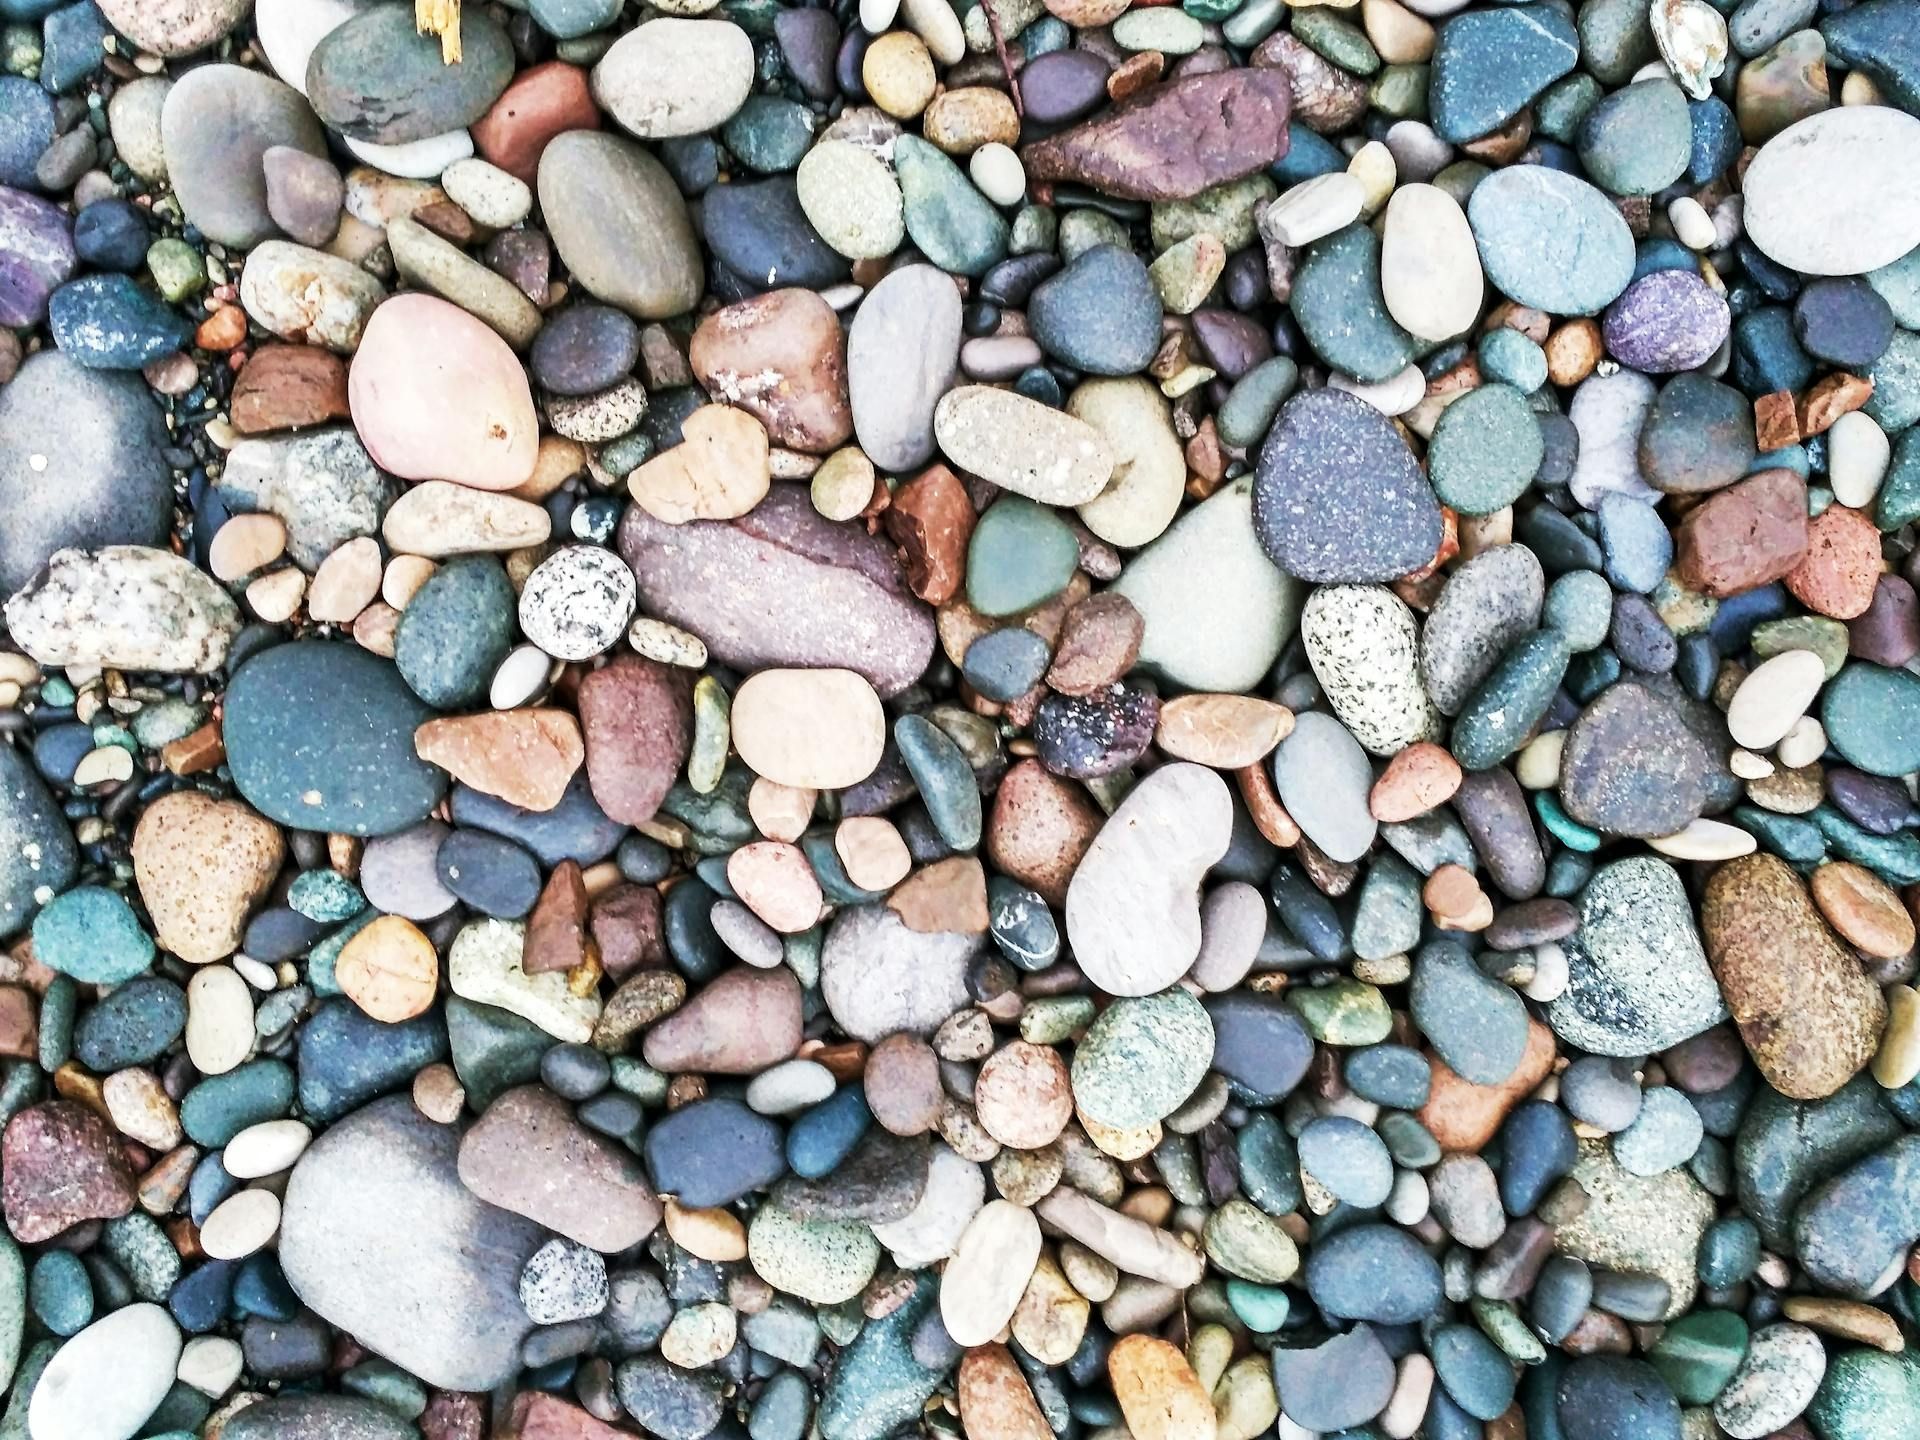 replacing mulch with rocks